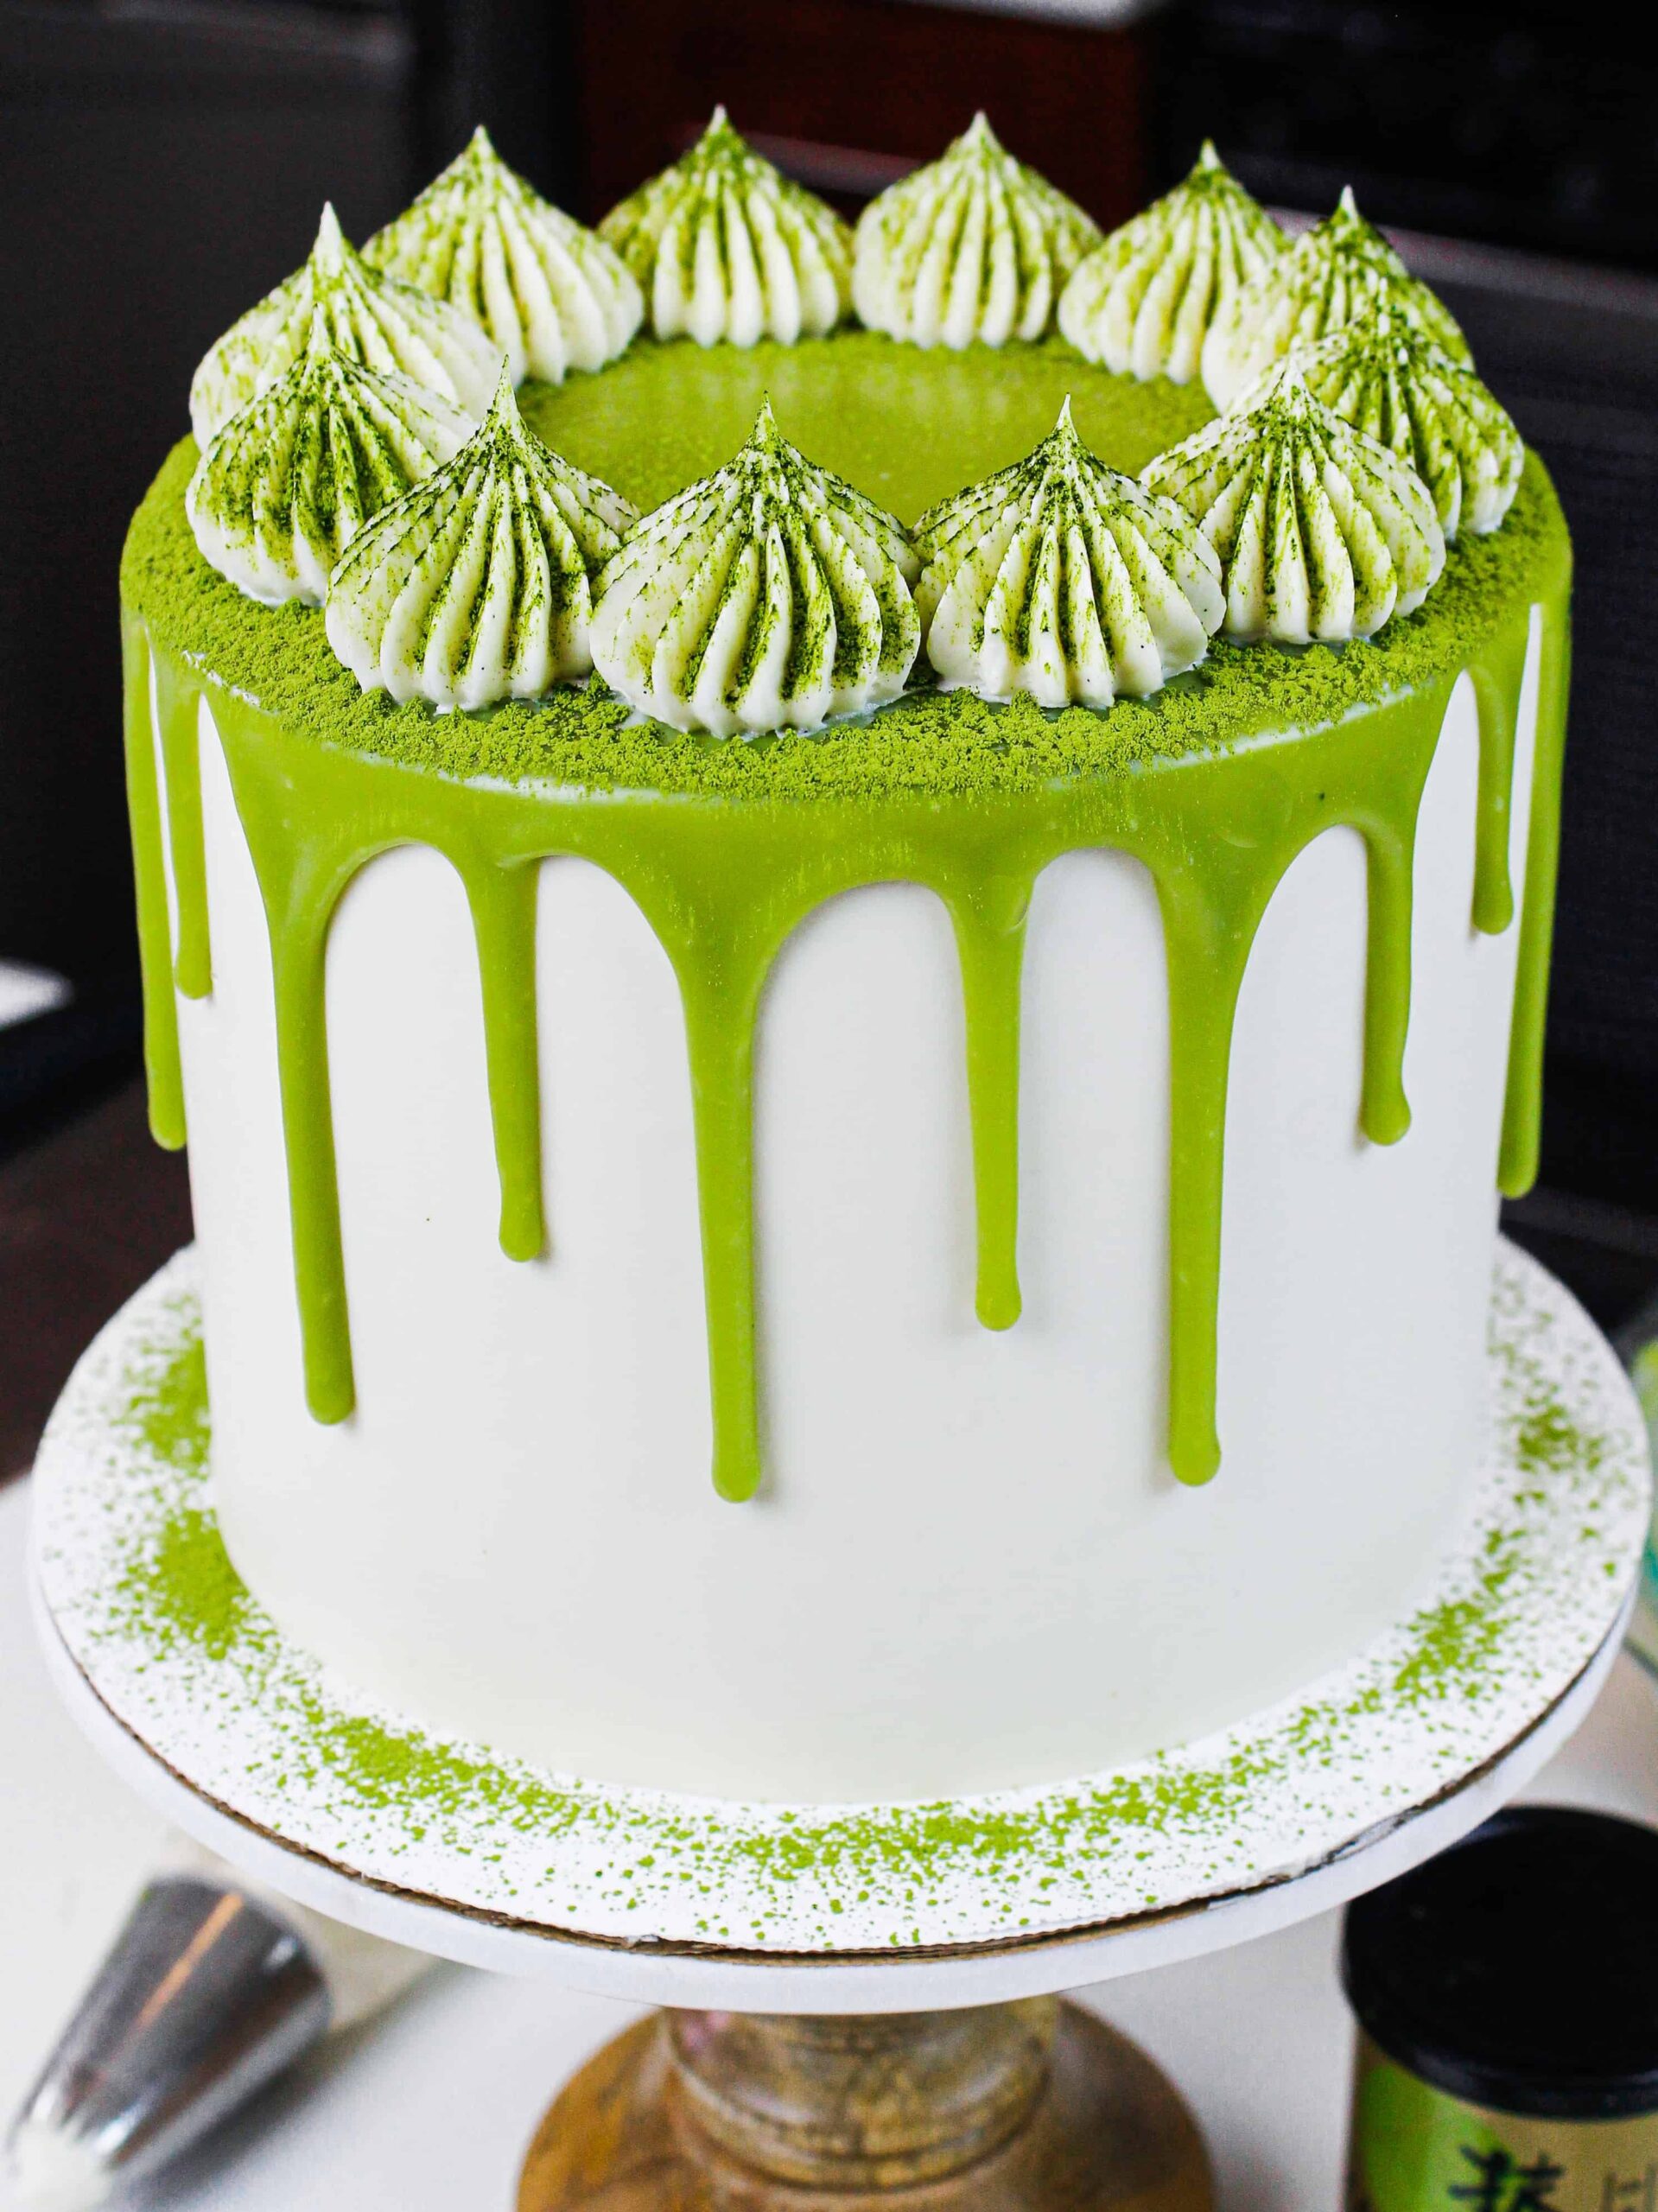 image of matcha cake on a wooden cake stand